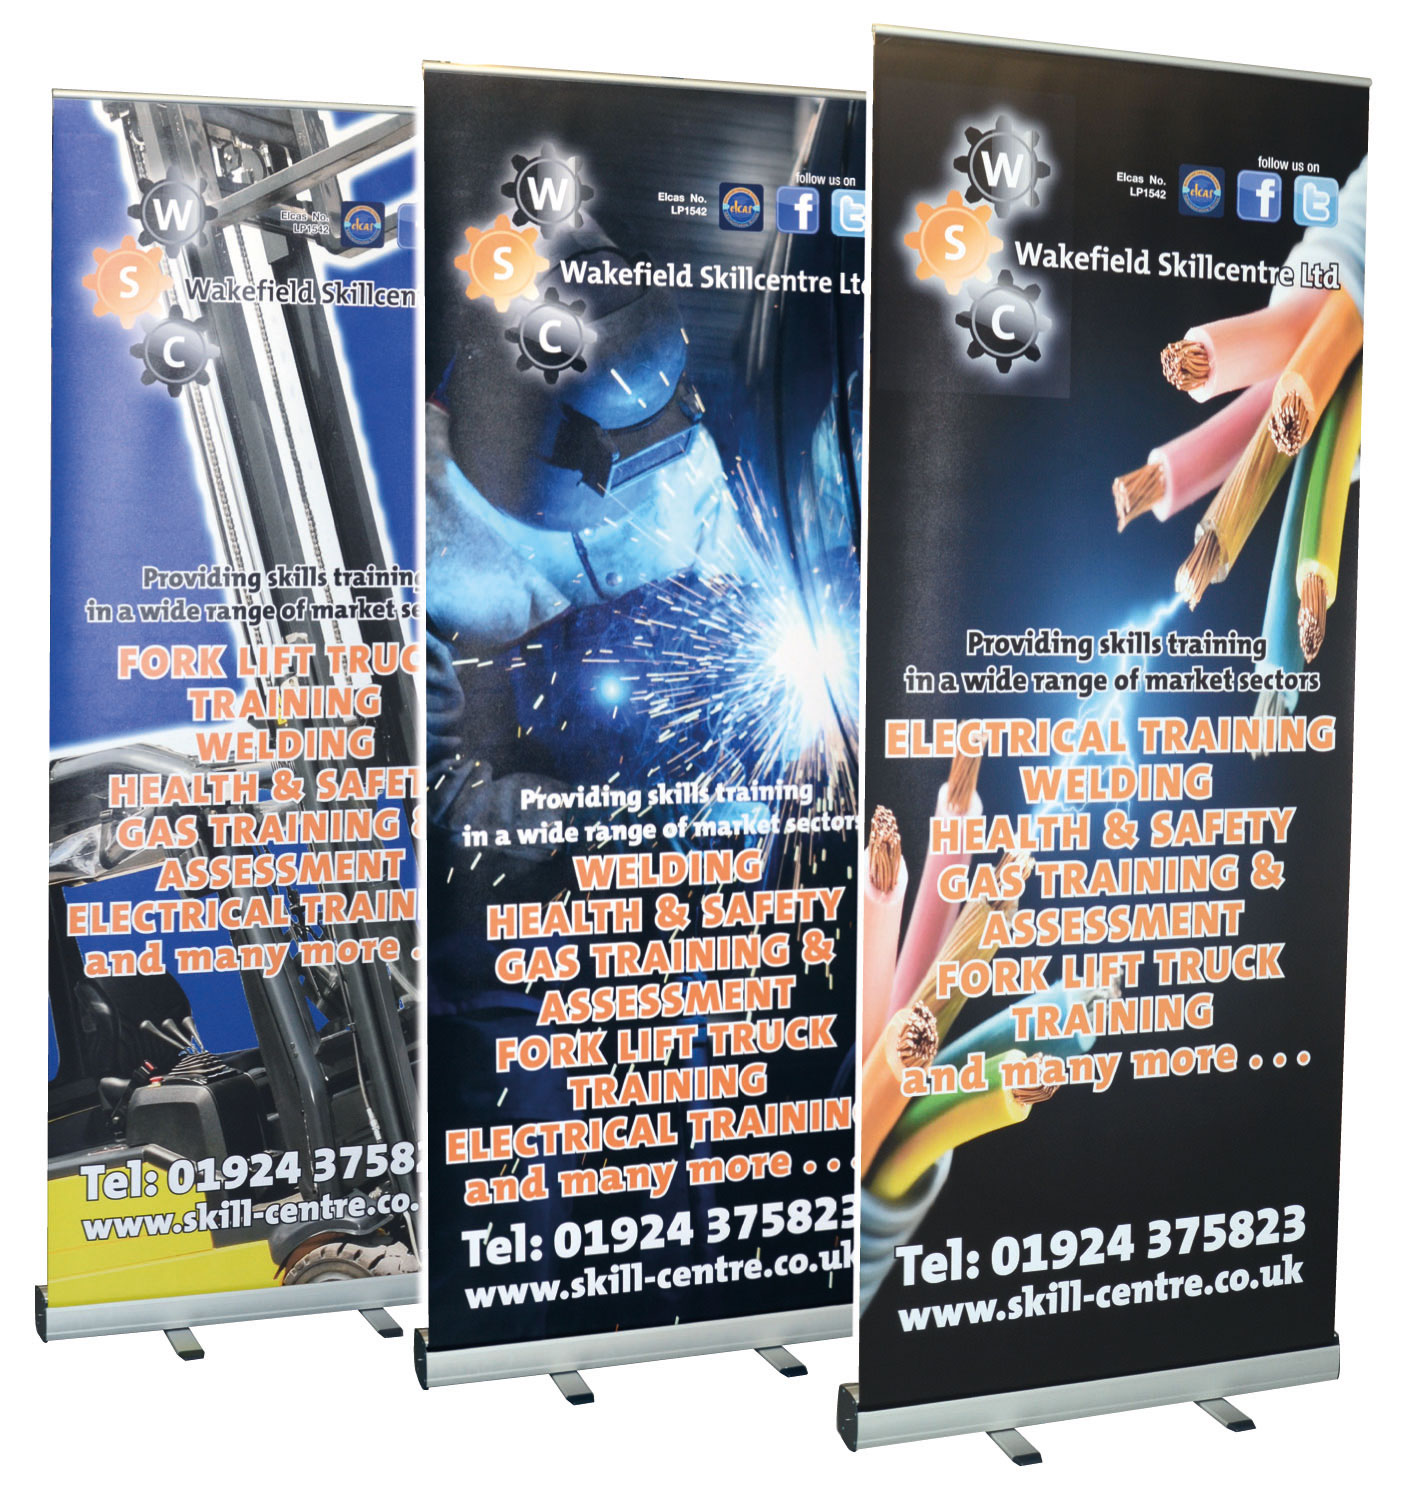 Pull up or pop up banners ideal for shows and fayres, trade stands etc. designed and manufactured nr Lincolnshire